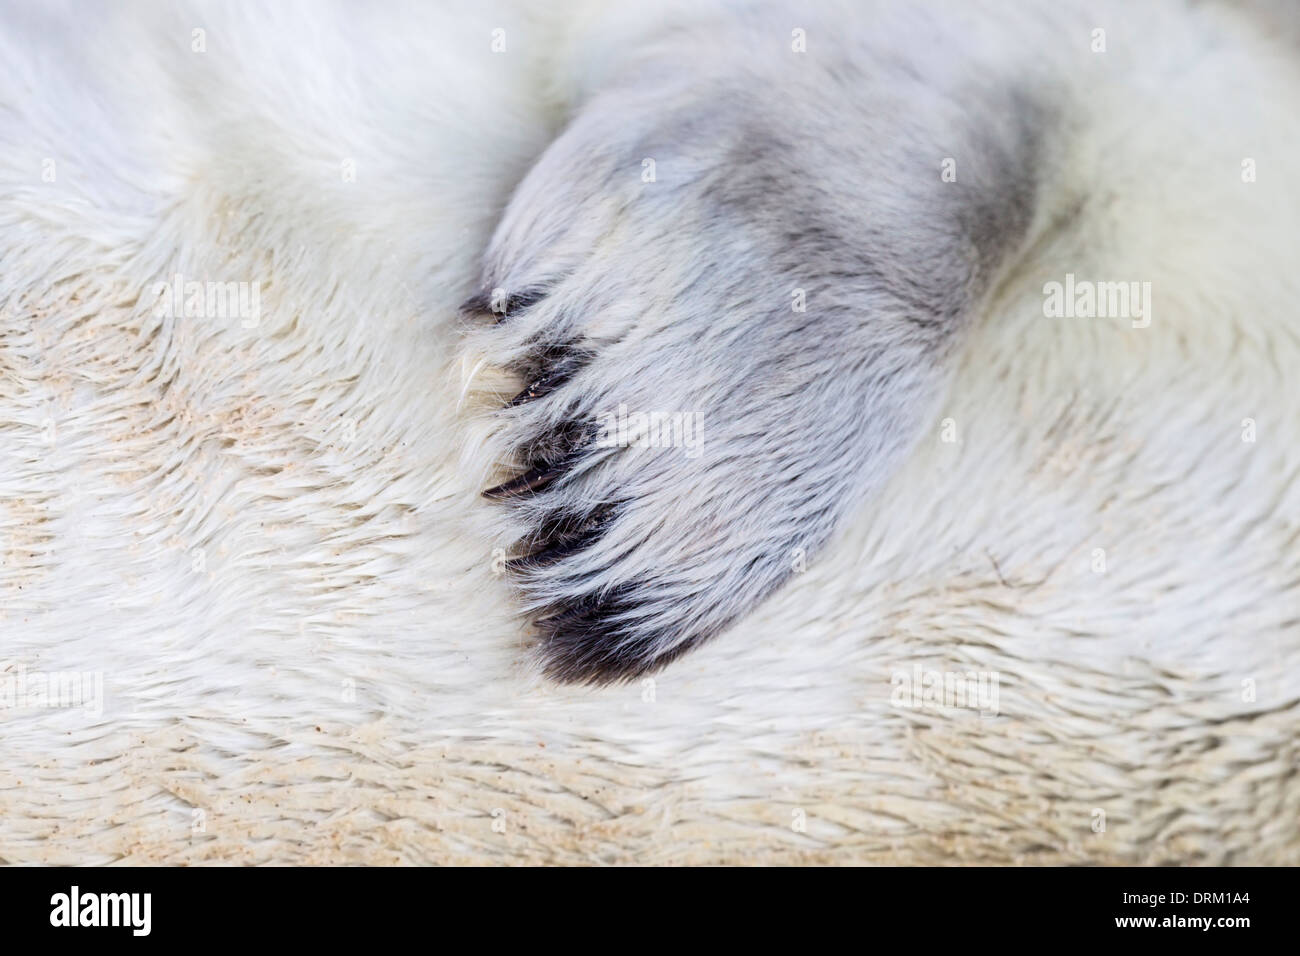 Close-up detail of the fore flipper of a Grey seal pup in white natal fur, North Sea coast, Norfolk, England Stock Photo